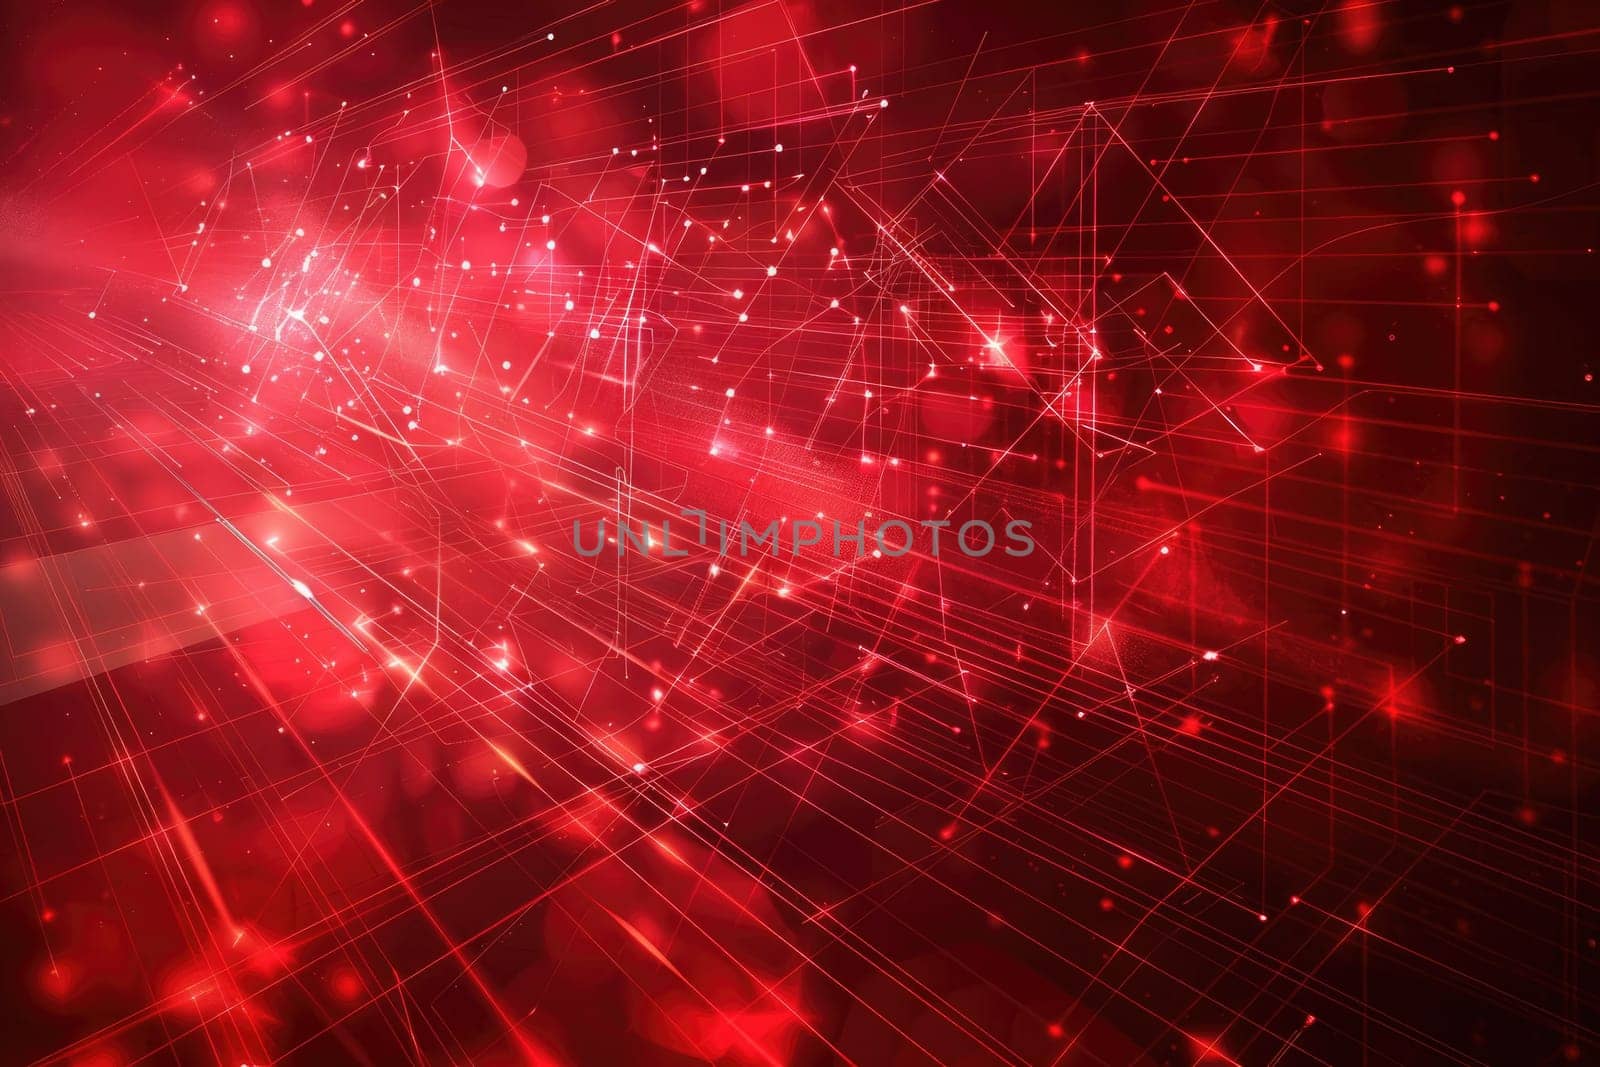 3D graphic of interconnected red glowing lines surrounding the globe